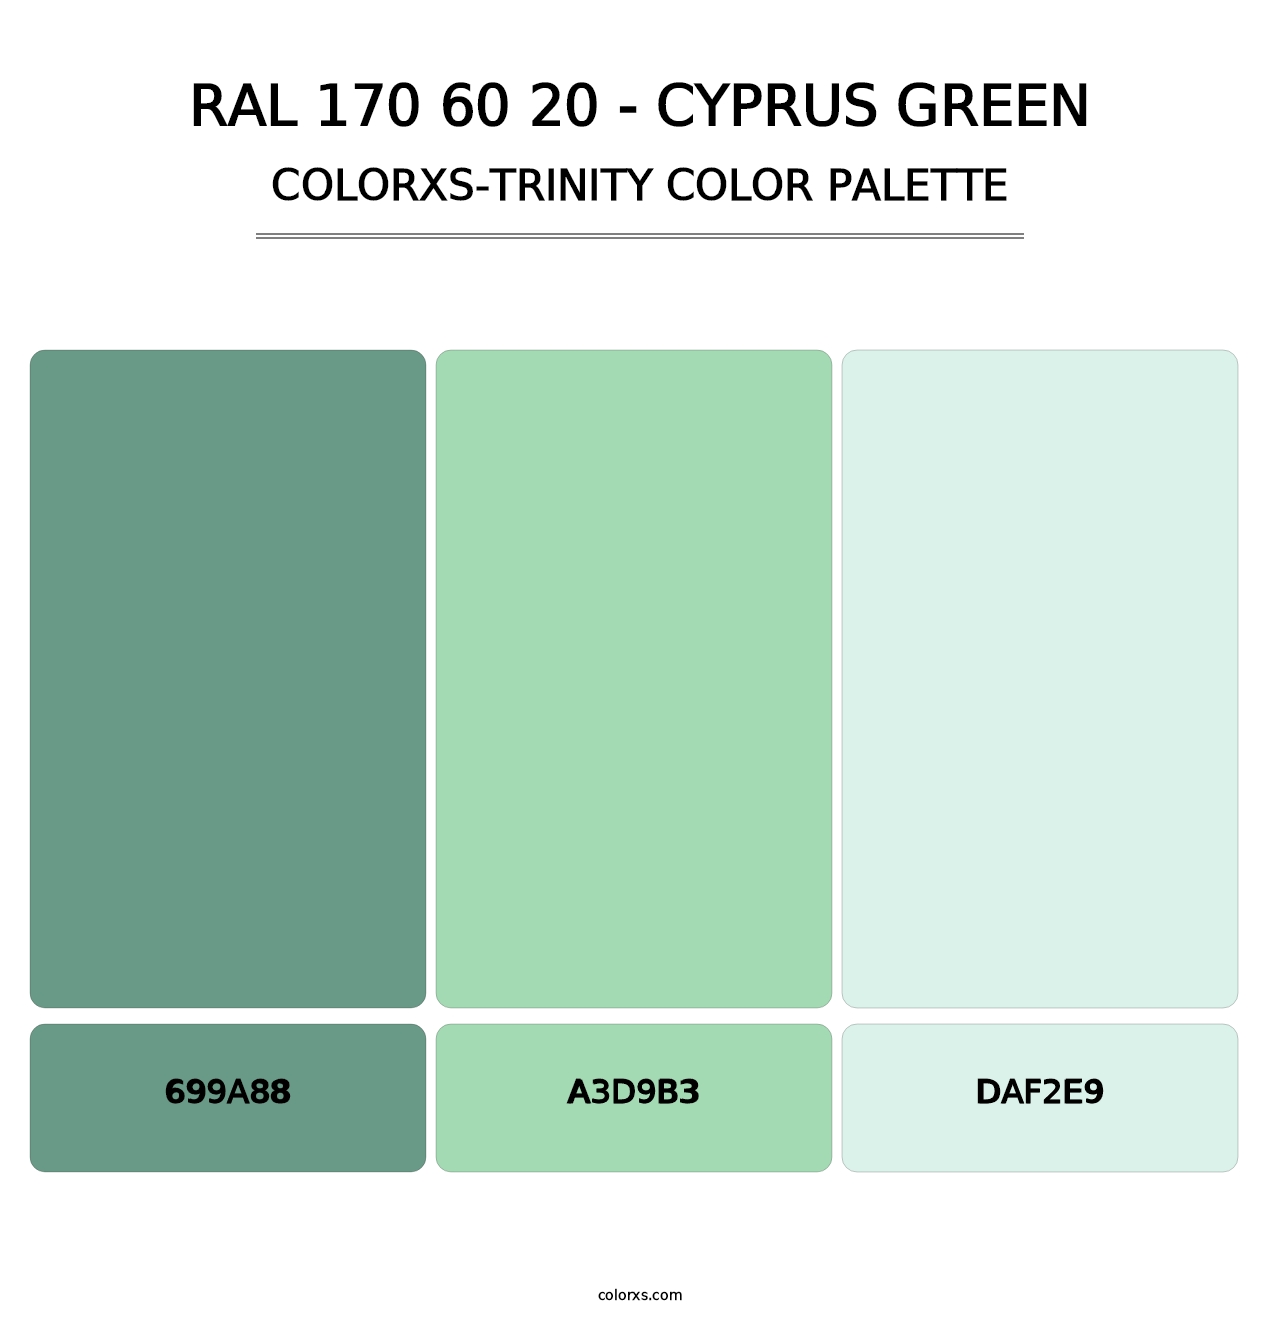 RAL 170 60 20 - Cyprus Green - Colorxs Trinity Palette